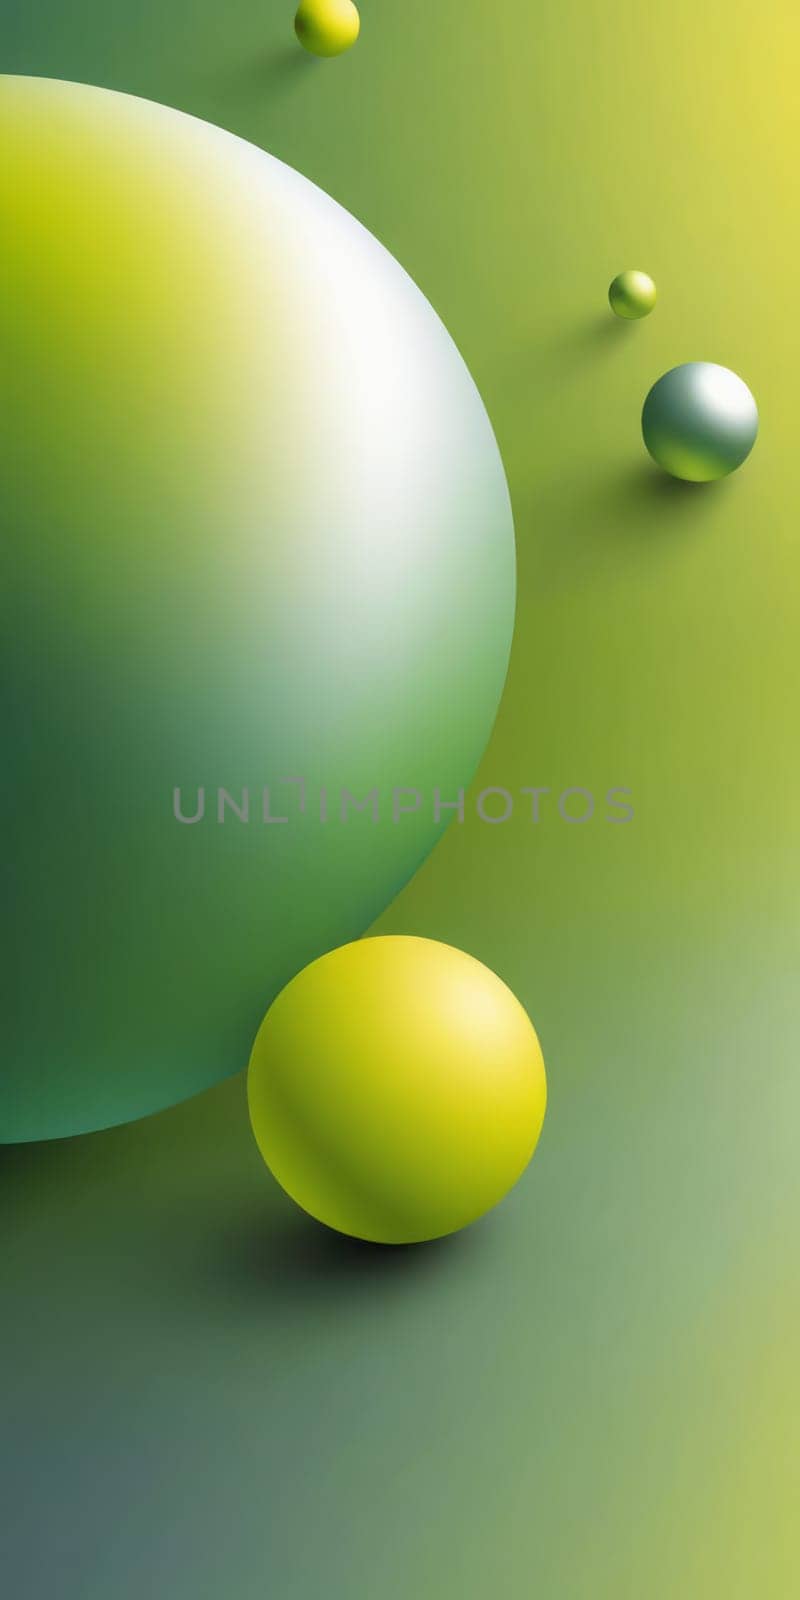 Spherical Shapes in Silver Yellowgreen by nkotlyar